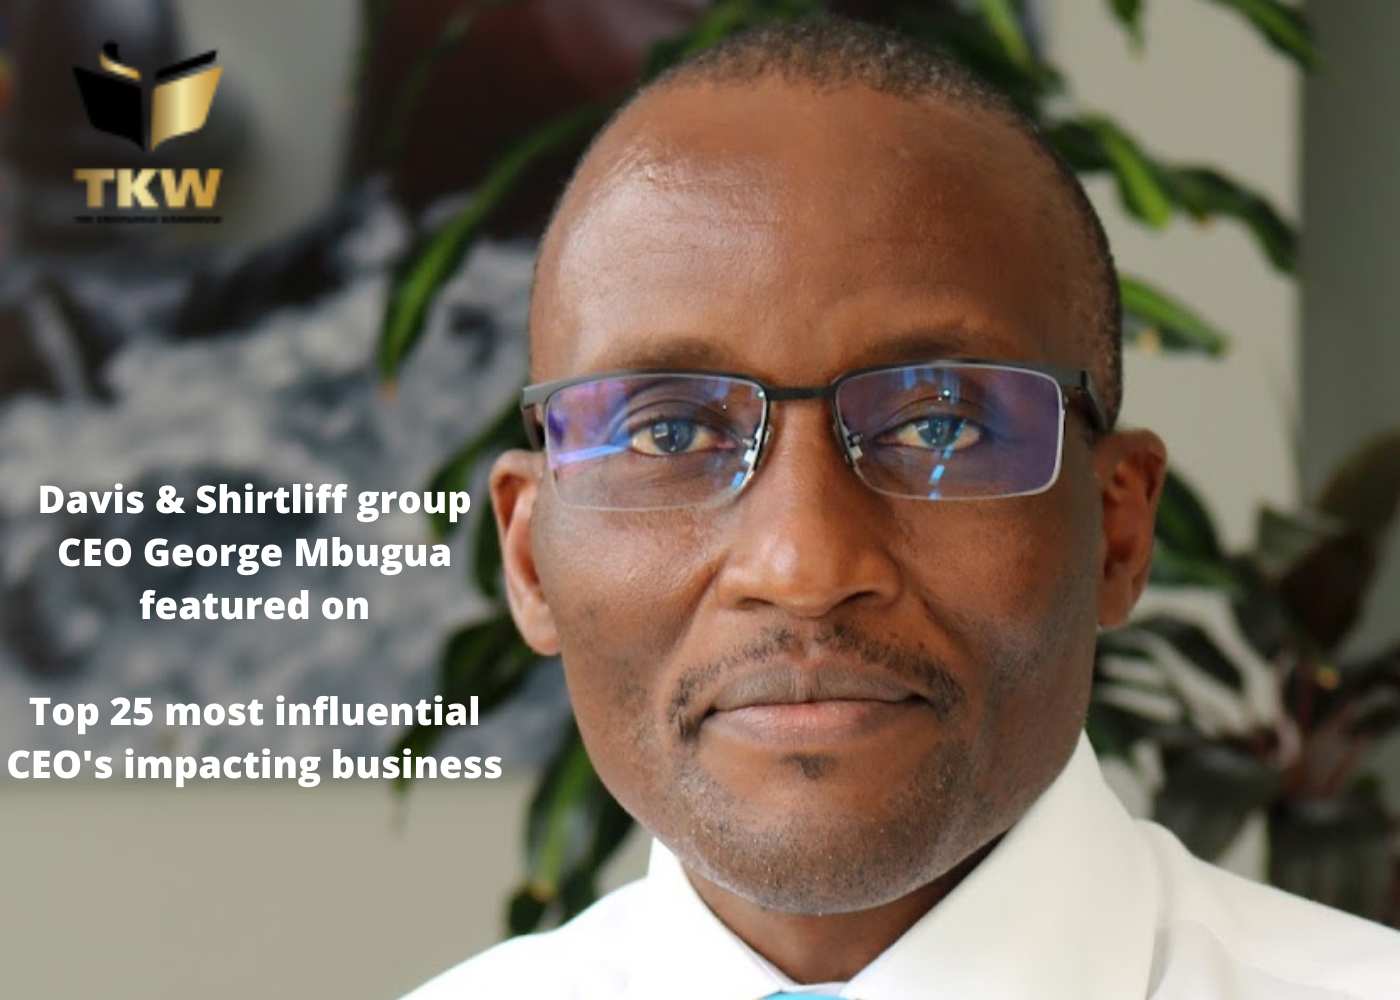 Davis & Shirtliff Group CEO George Mbugua featured on the monthly daily on top 25 most influential CEO's